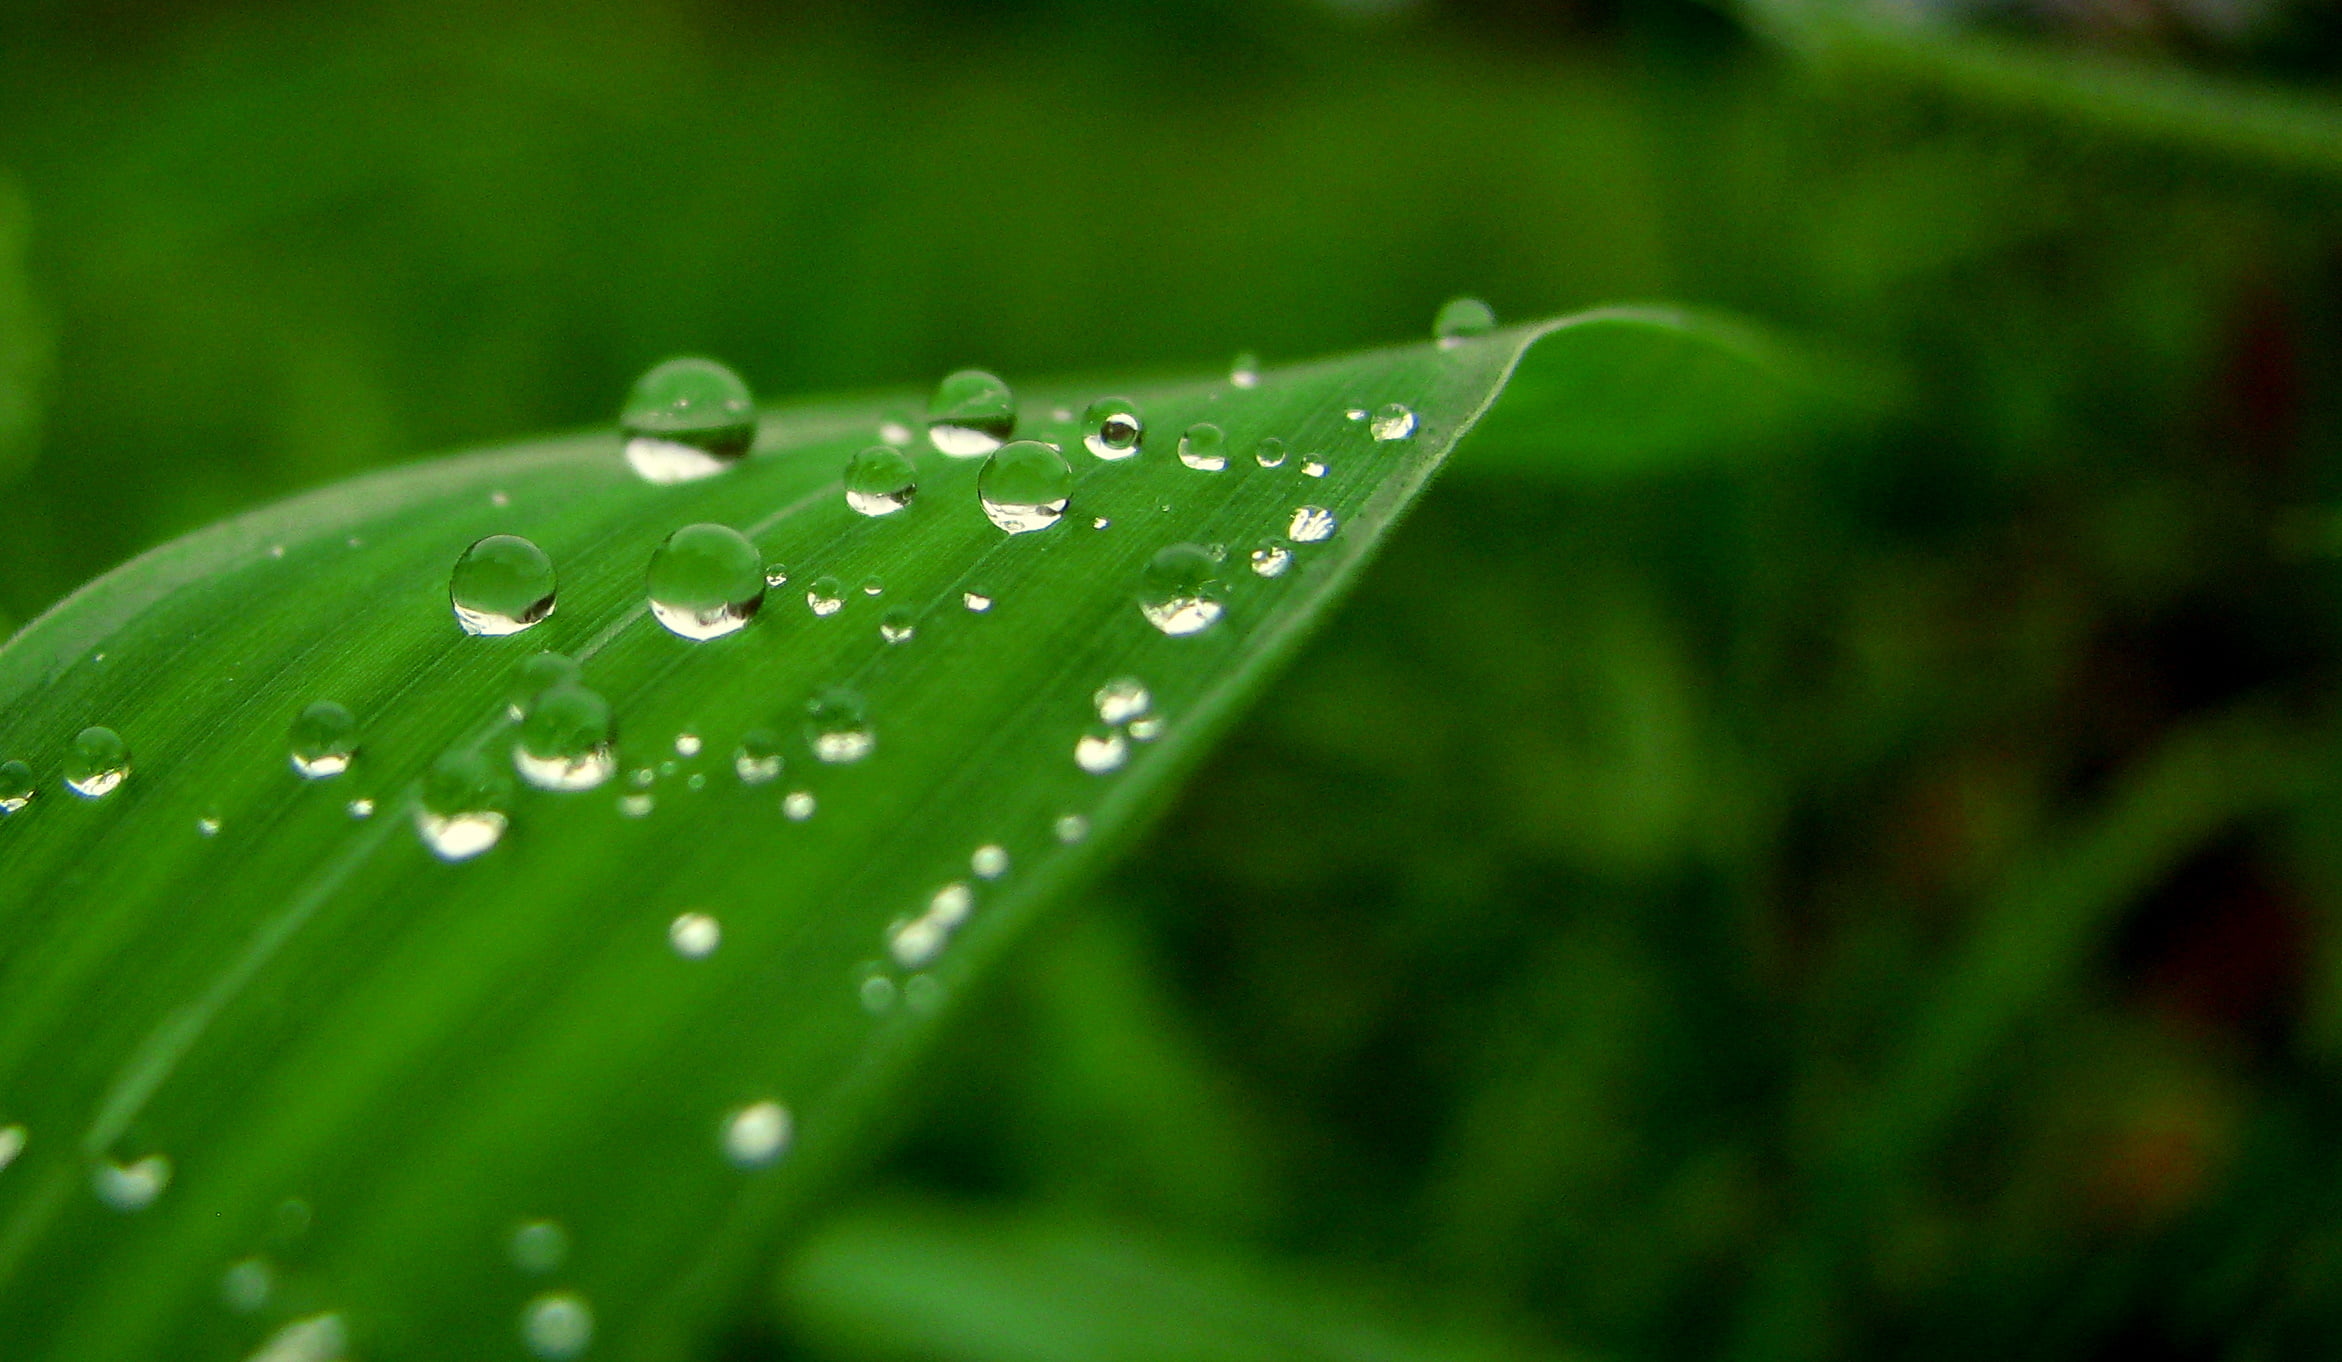 water drops on a leaf close up photo, Nature, pearls, green, reflection